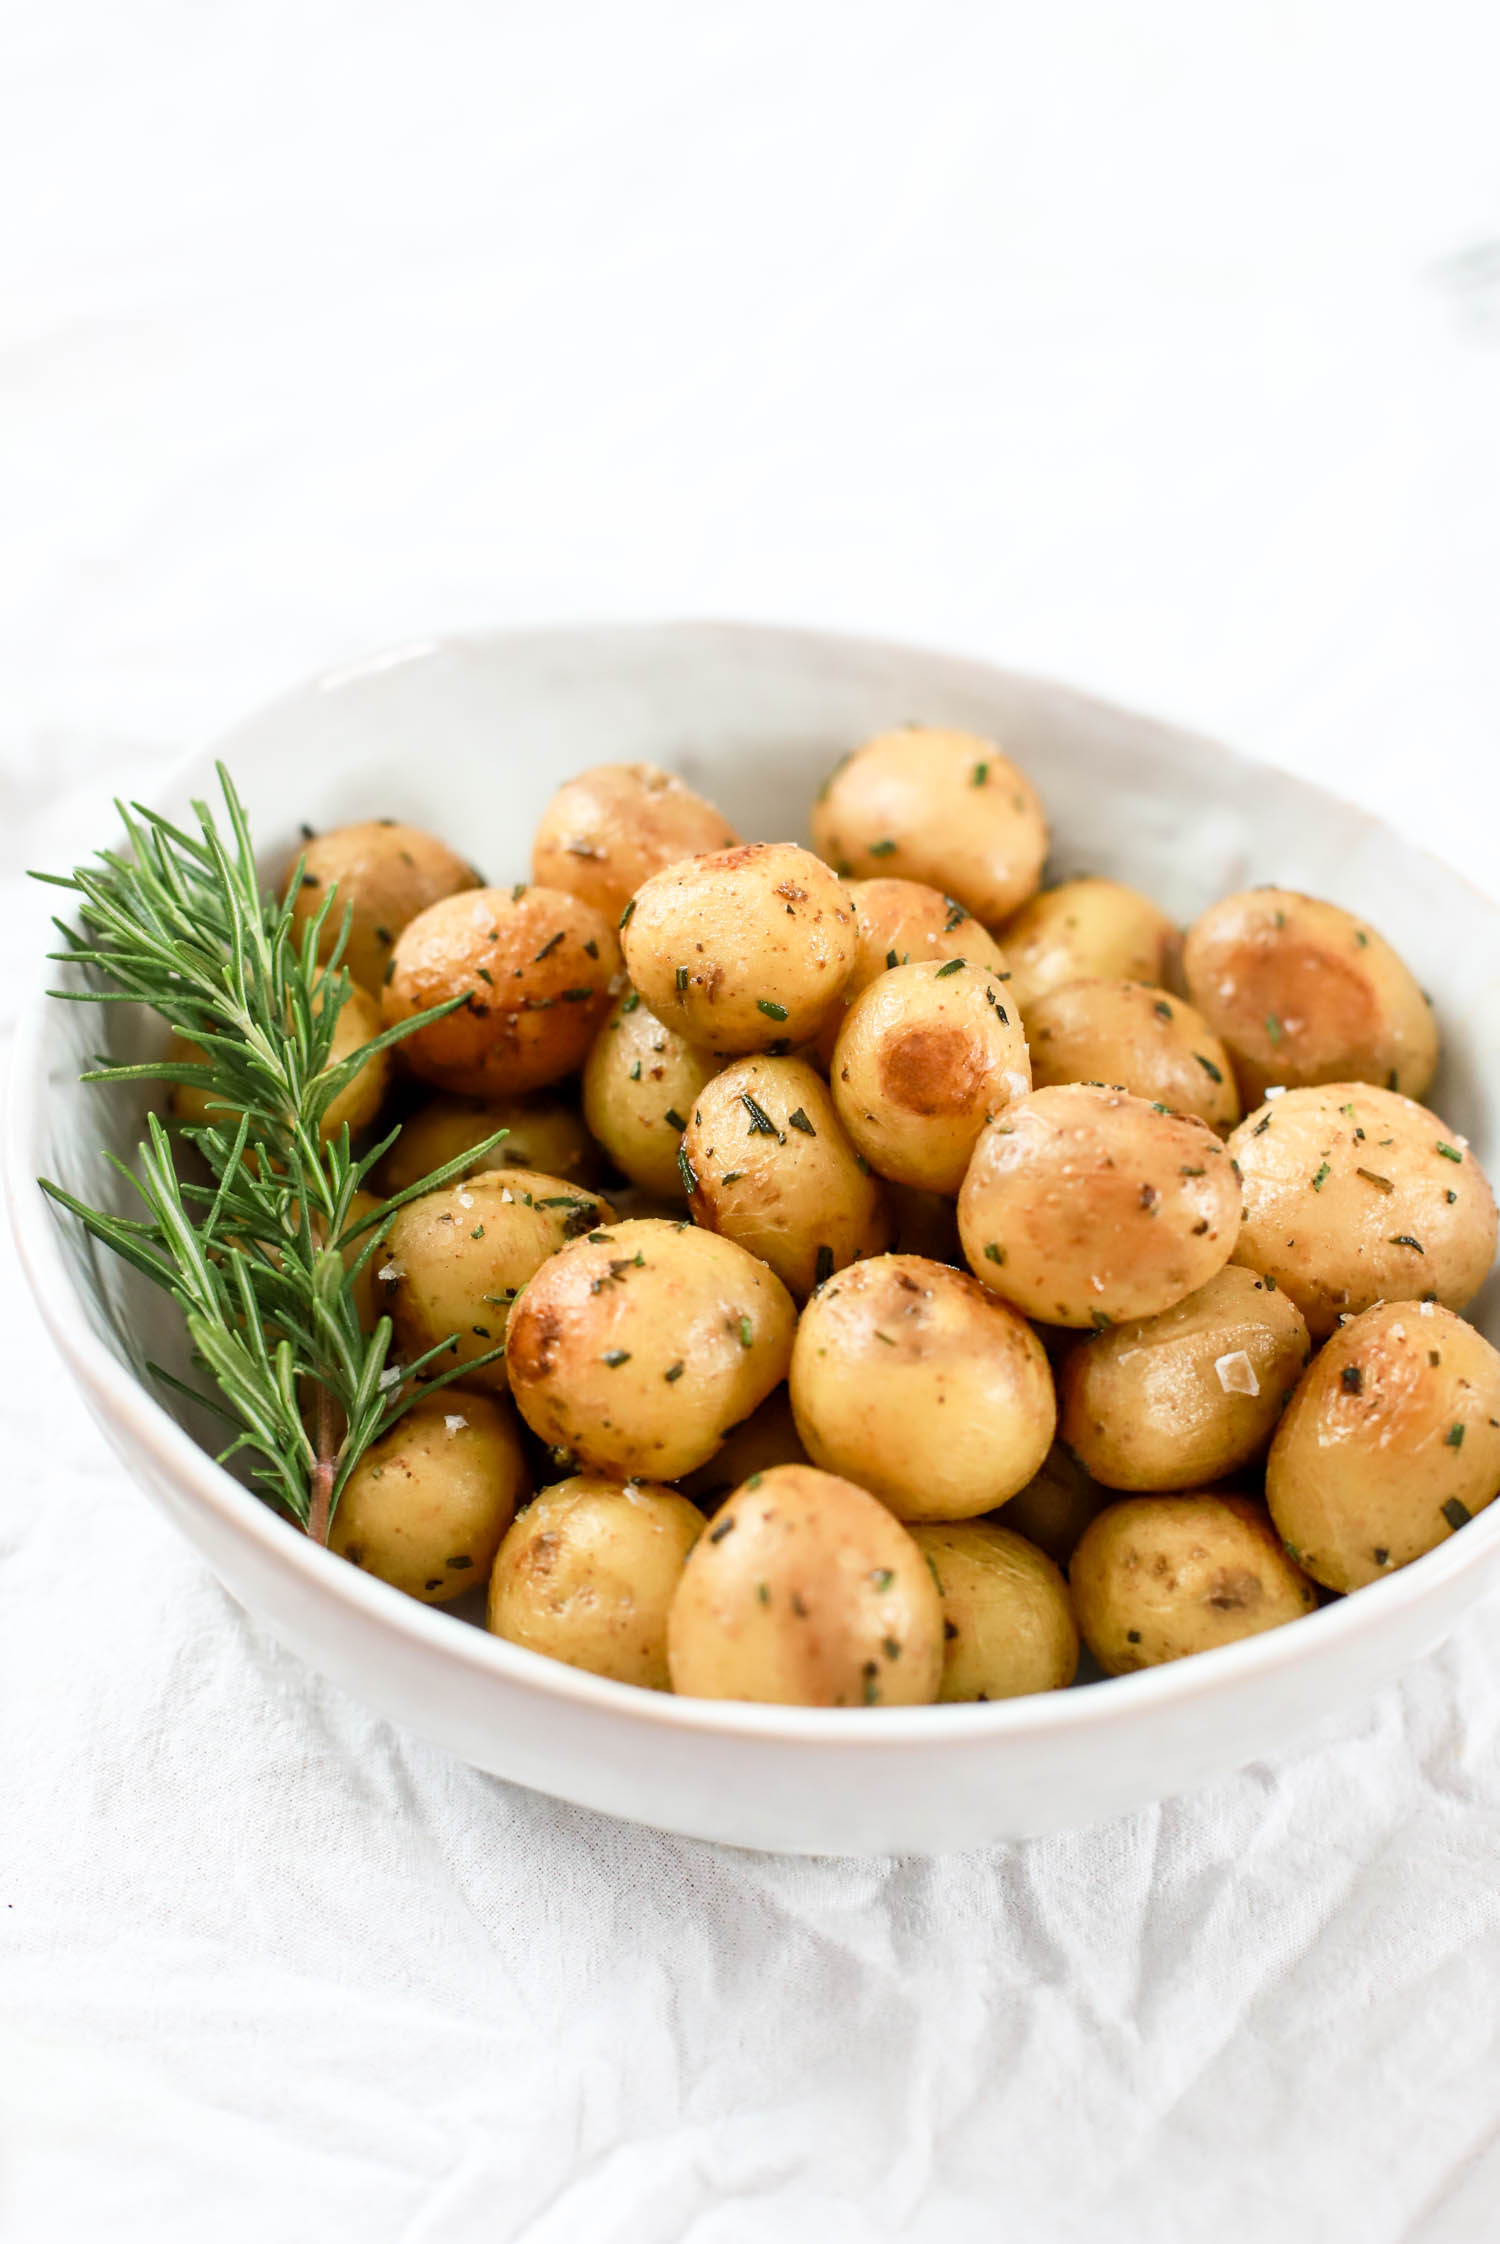 White bowl of steamed baby potatoes with rosemary.